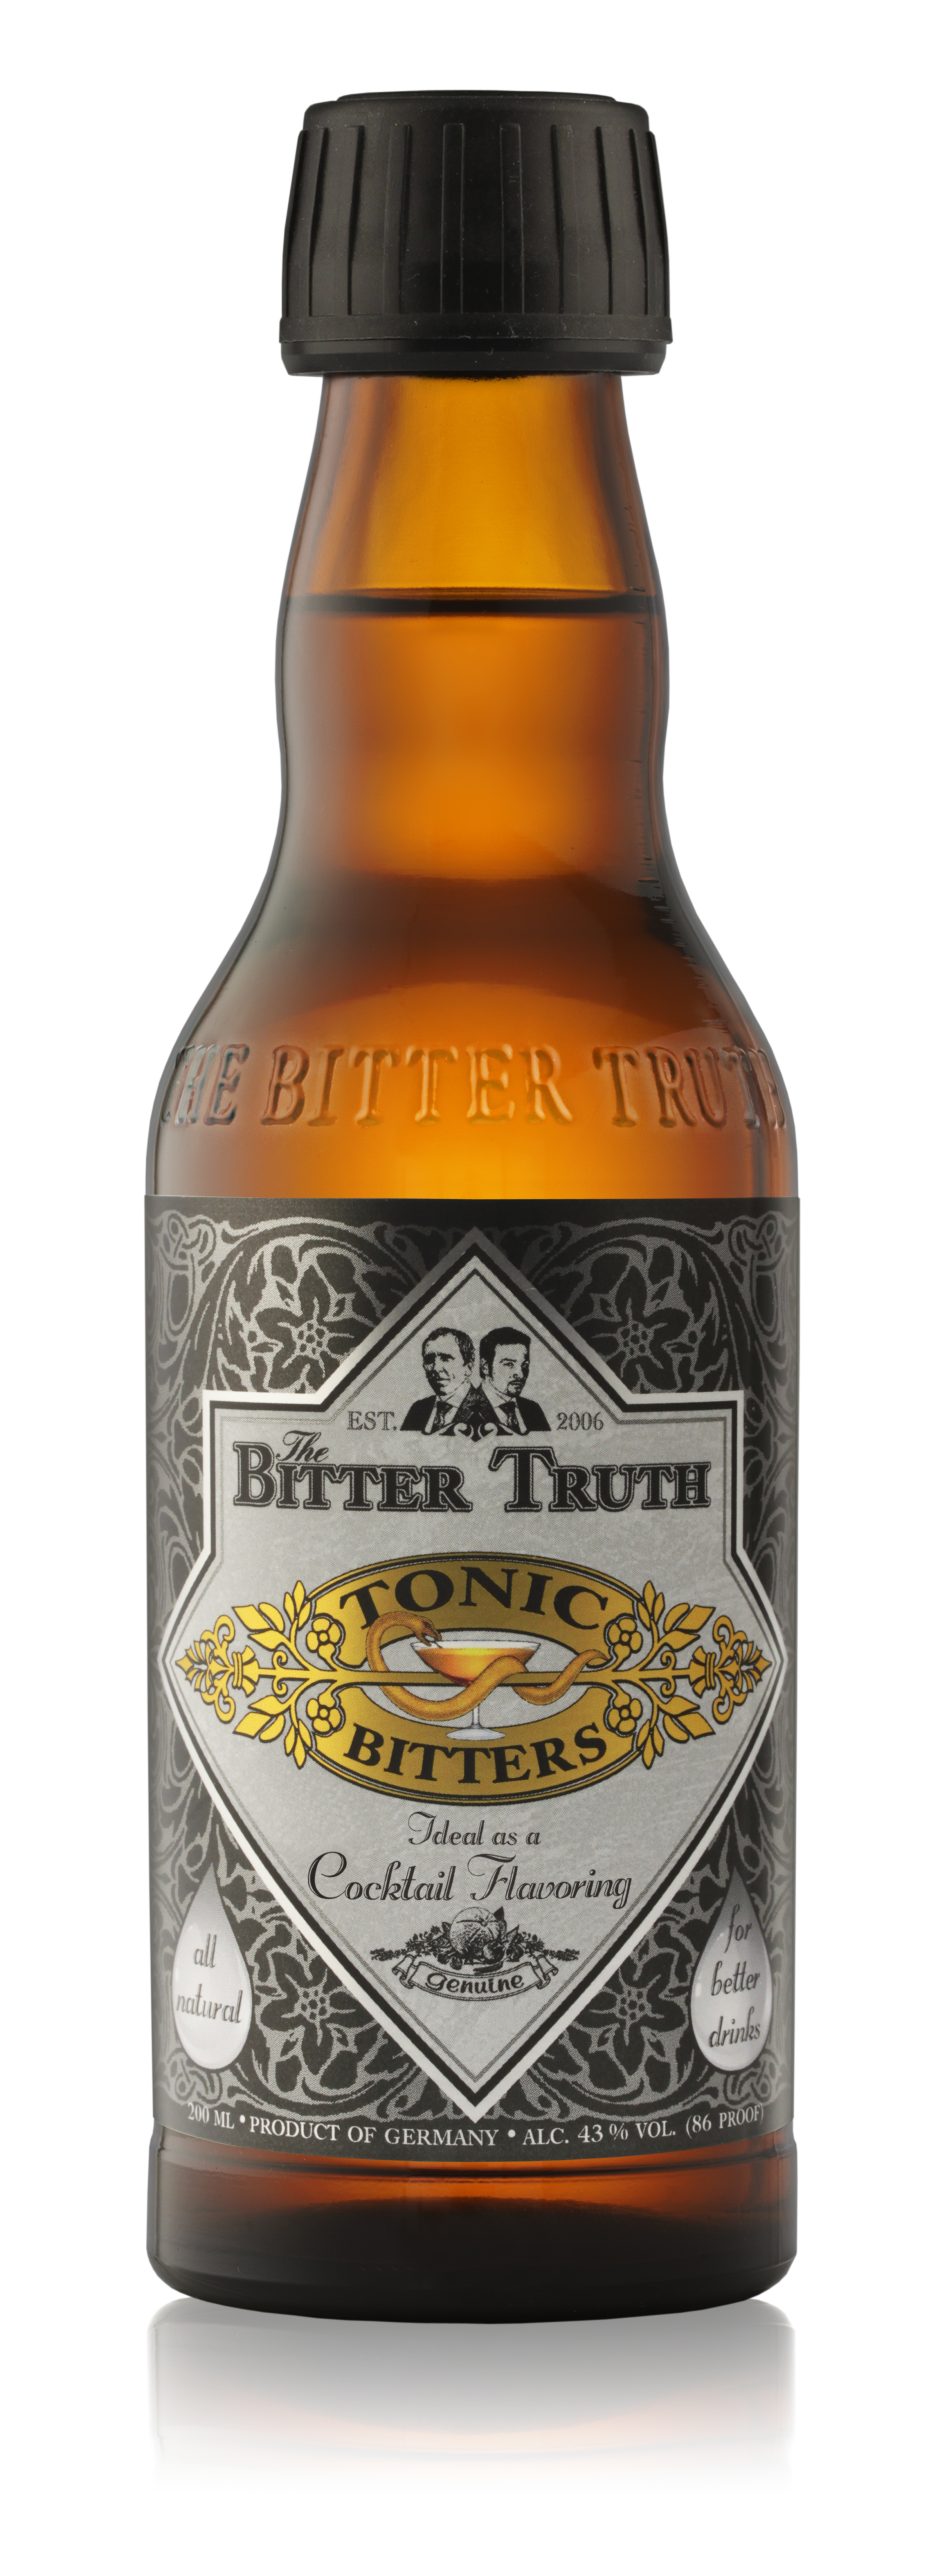 THE BITTER TRUTH TONIC BITTERS 43% (1 X 20 CL)